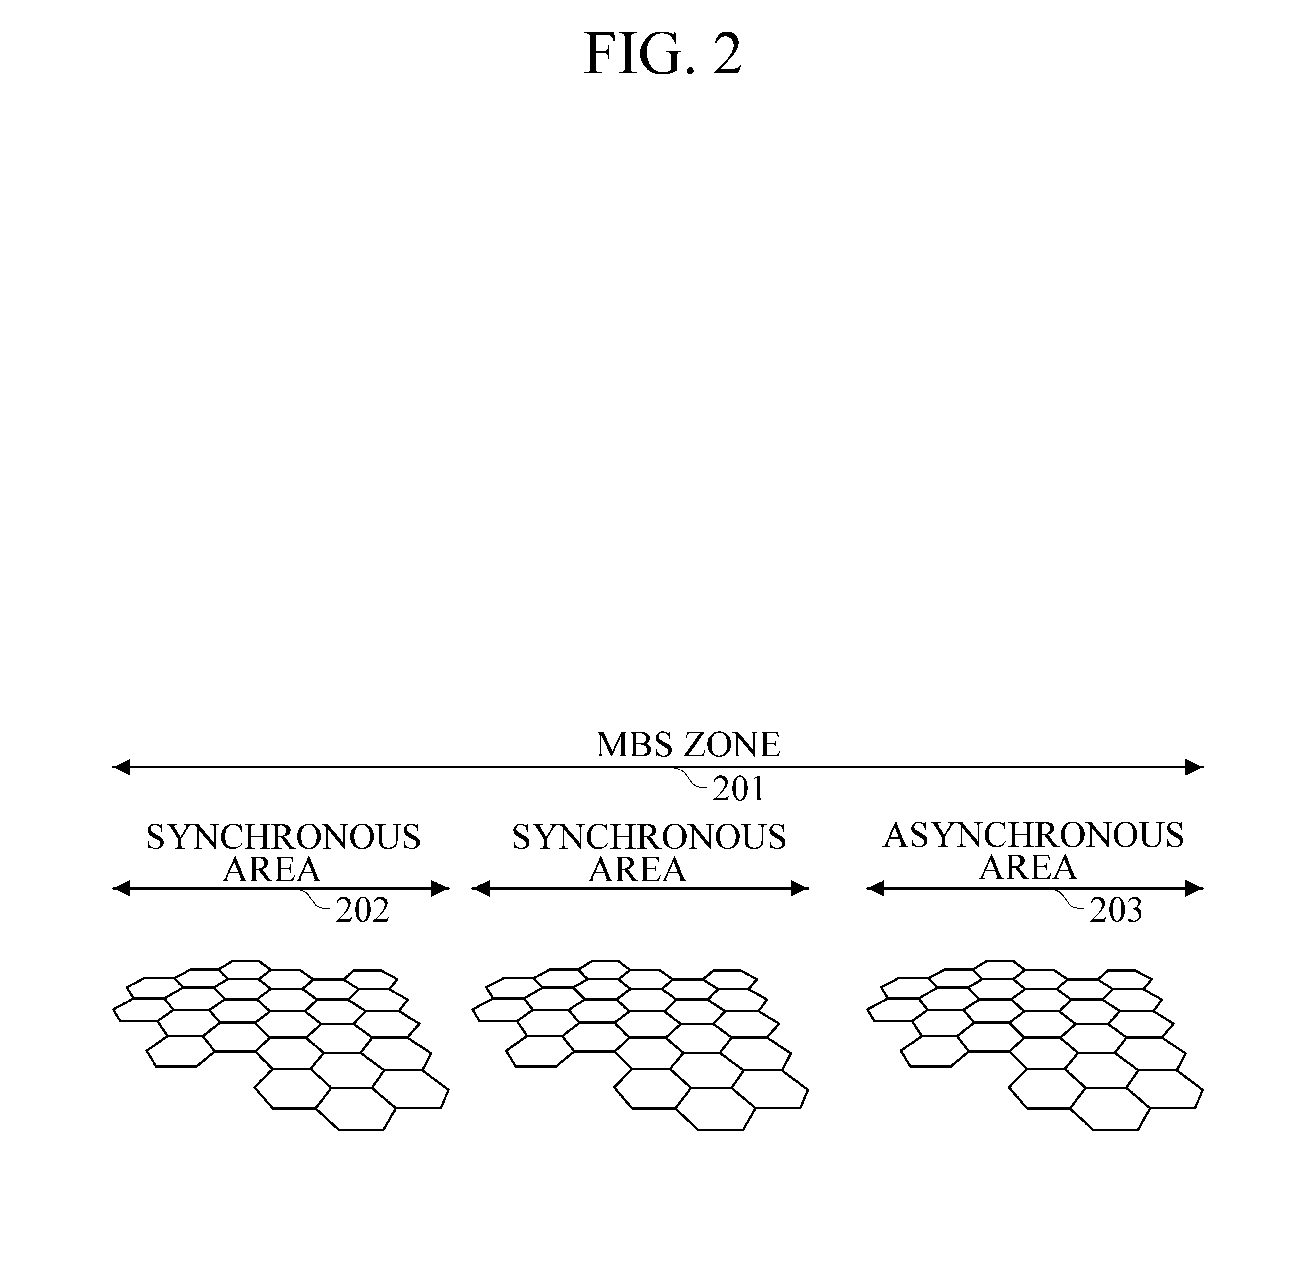 Method for counting terminals for multicast/broadcast service